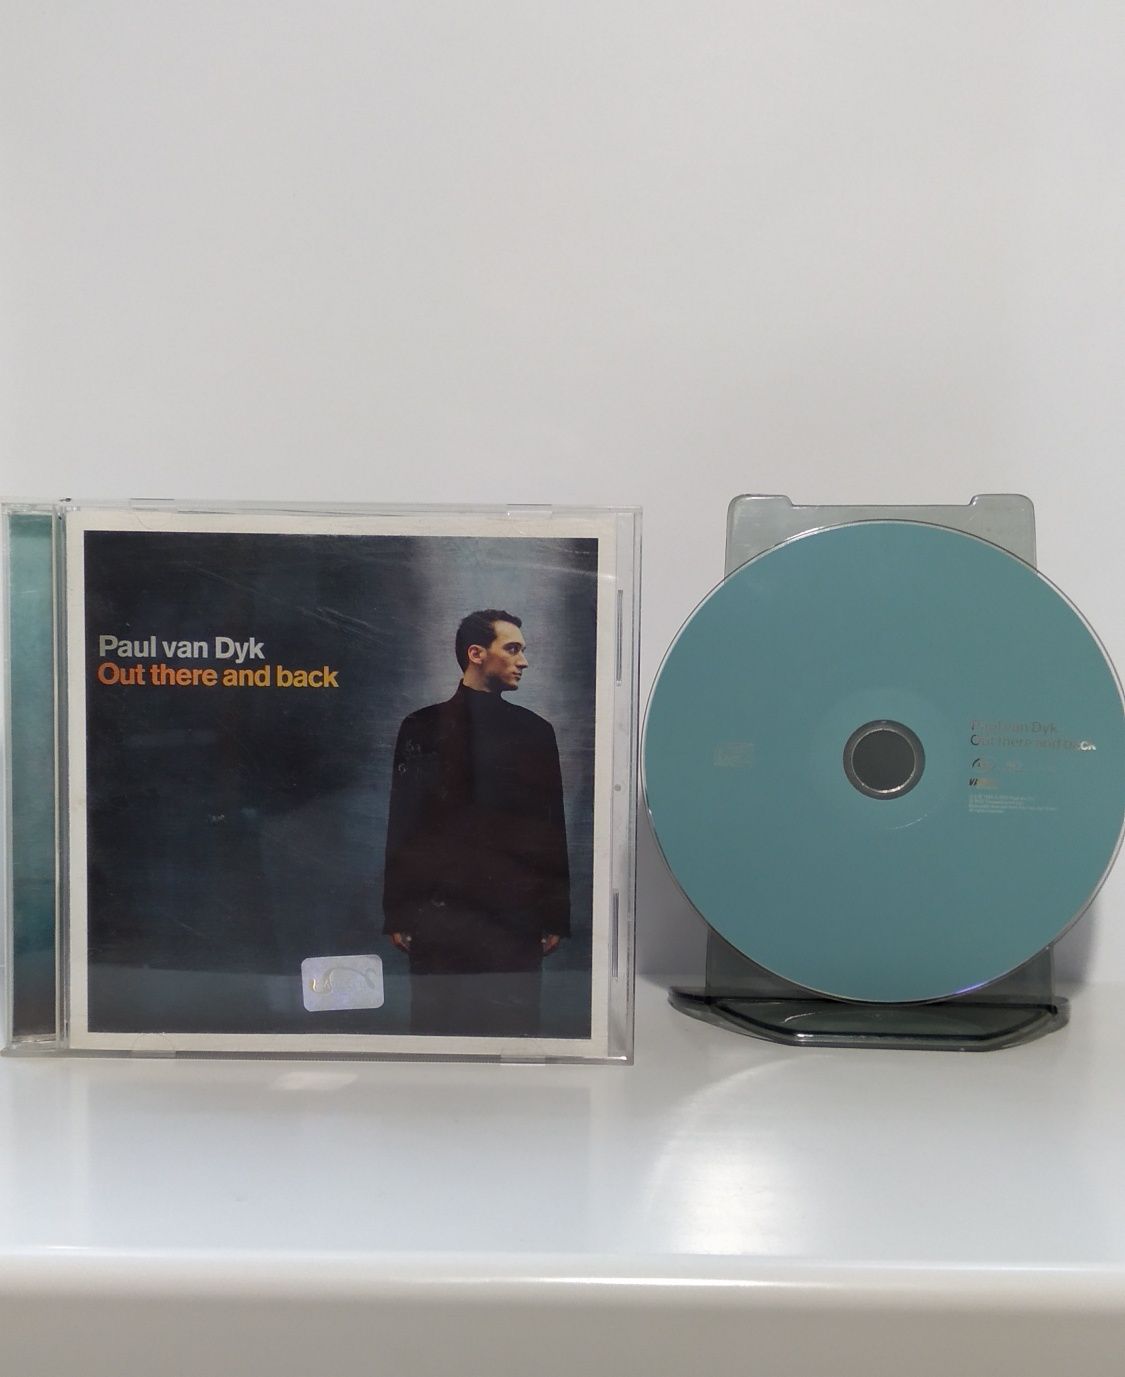 CD Paul van Dyk "Out there and back" СД диски музыкальные Пауль Ван да